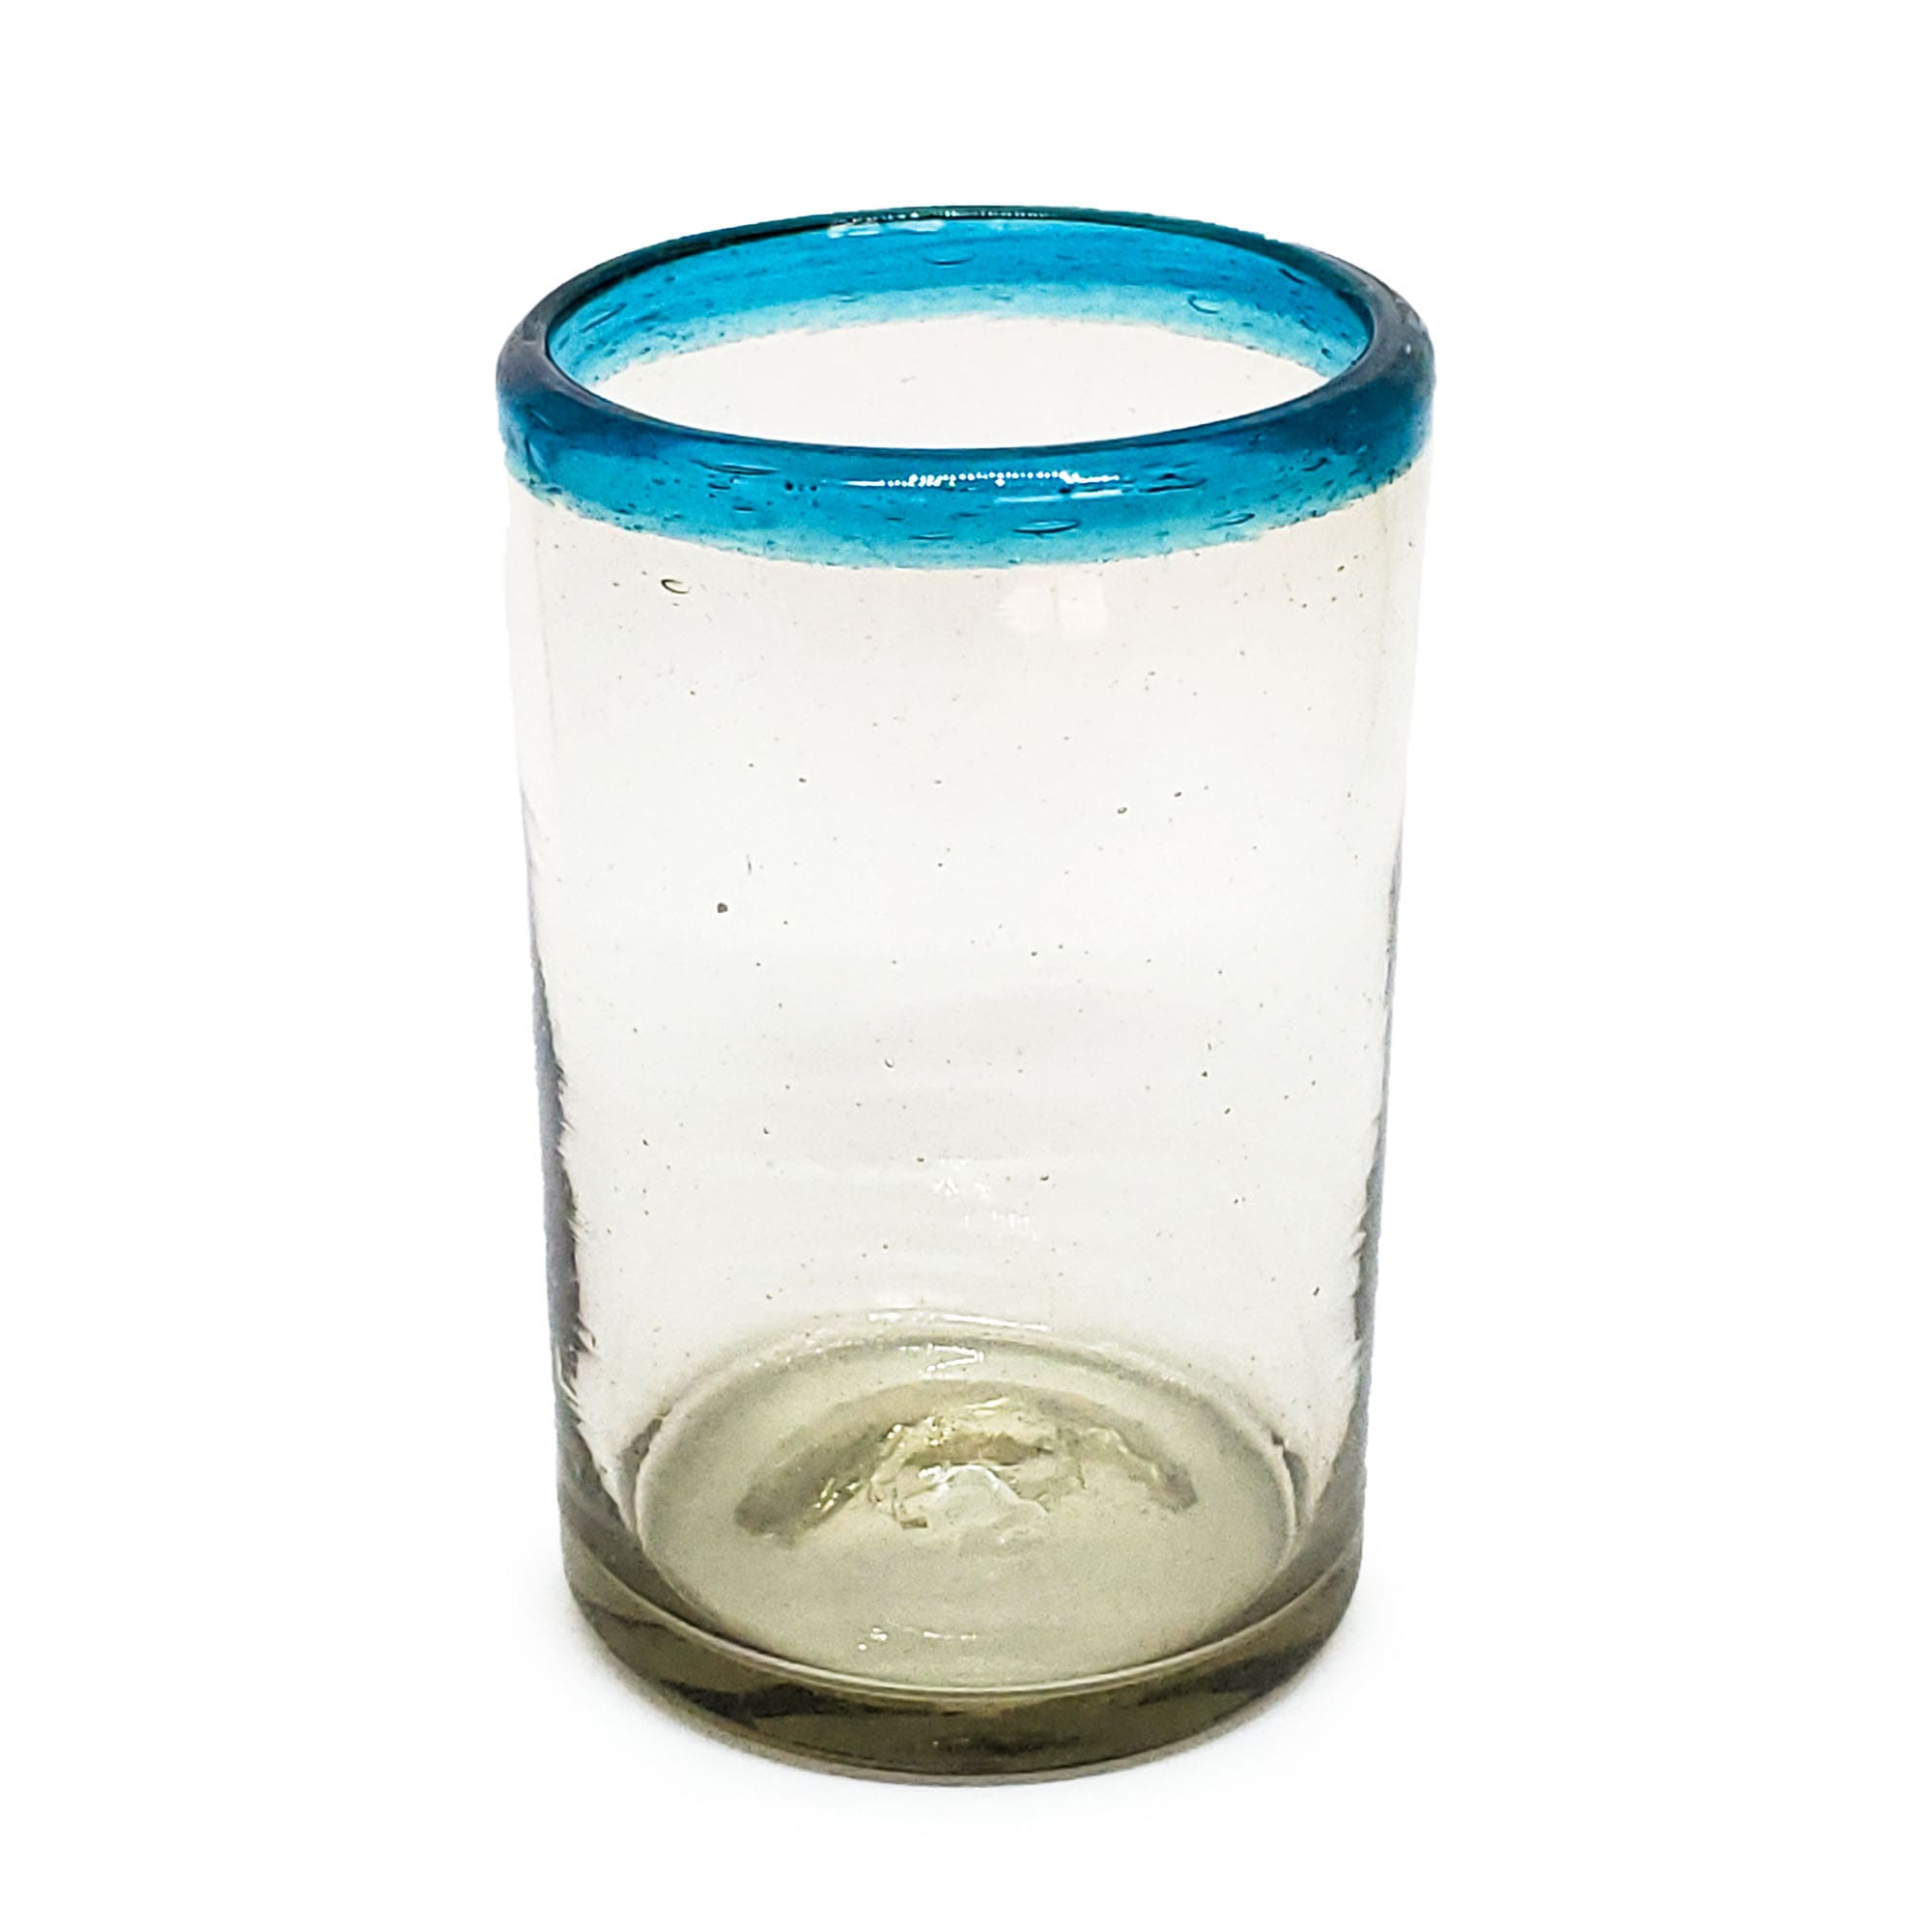 Wholesale Mexican Glasses / Aqua Blue Rim 14 oz Drinking Glasses  / These glasses are sure to embelish any table setting, with their aqua blue decor.<br>1-Year Product Replacement in case of defects (glasses broken in dishwasher is considered a defect).